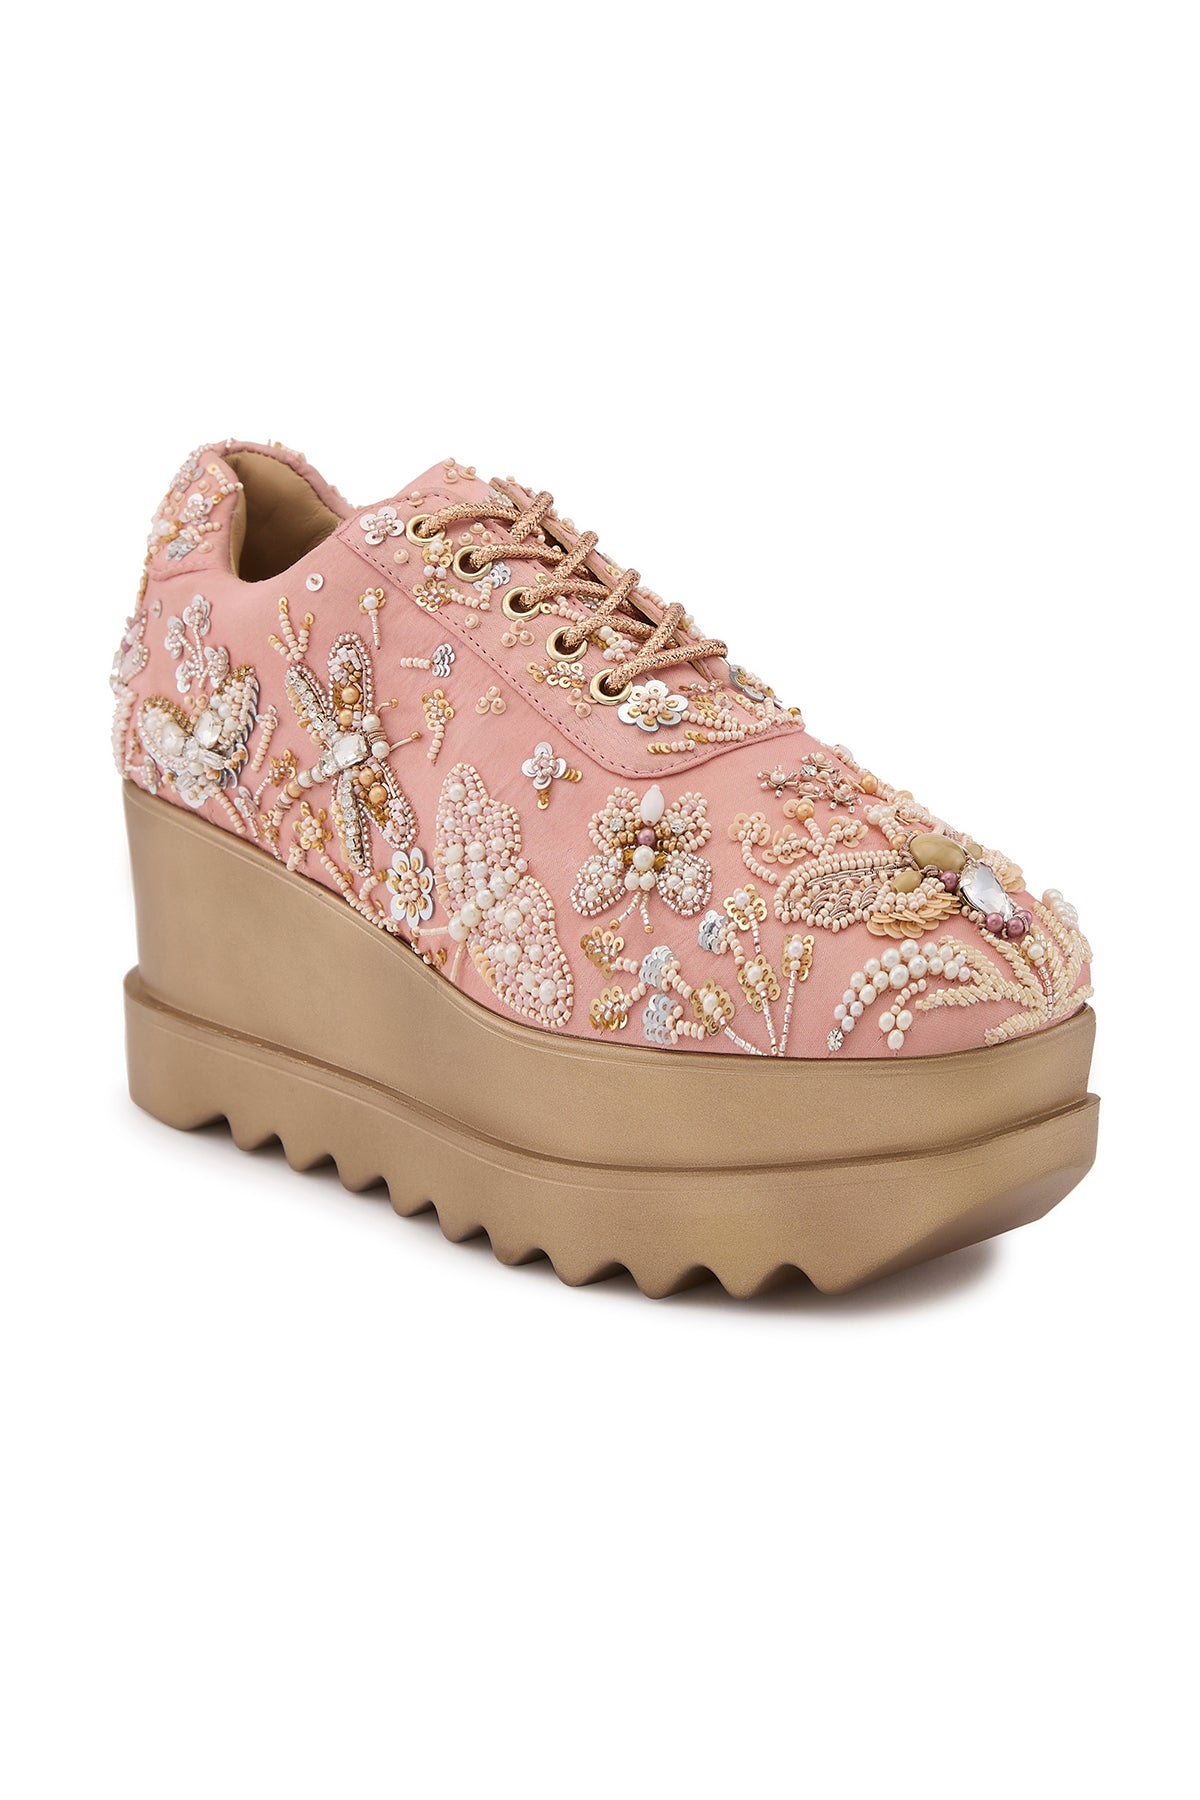 Mystic Forest Wedge Sneakers